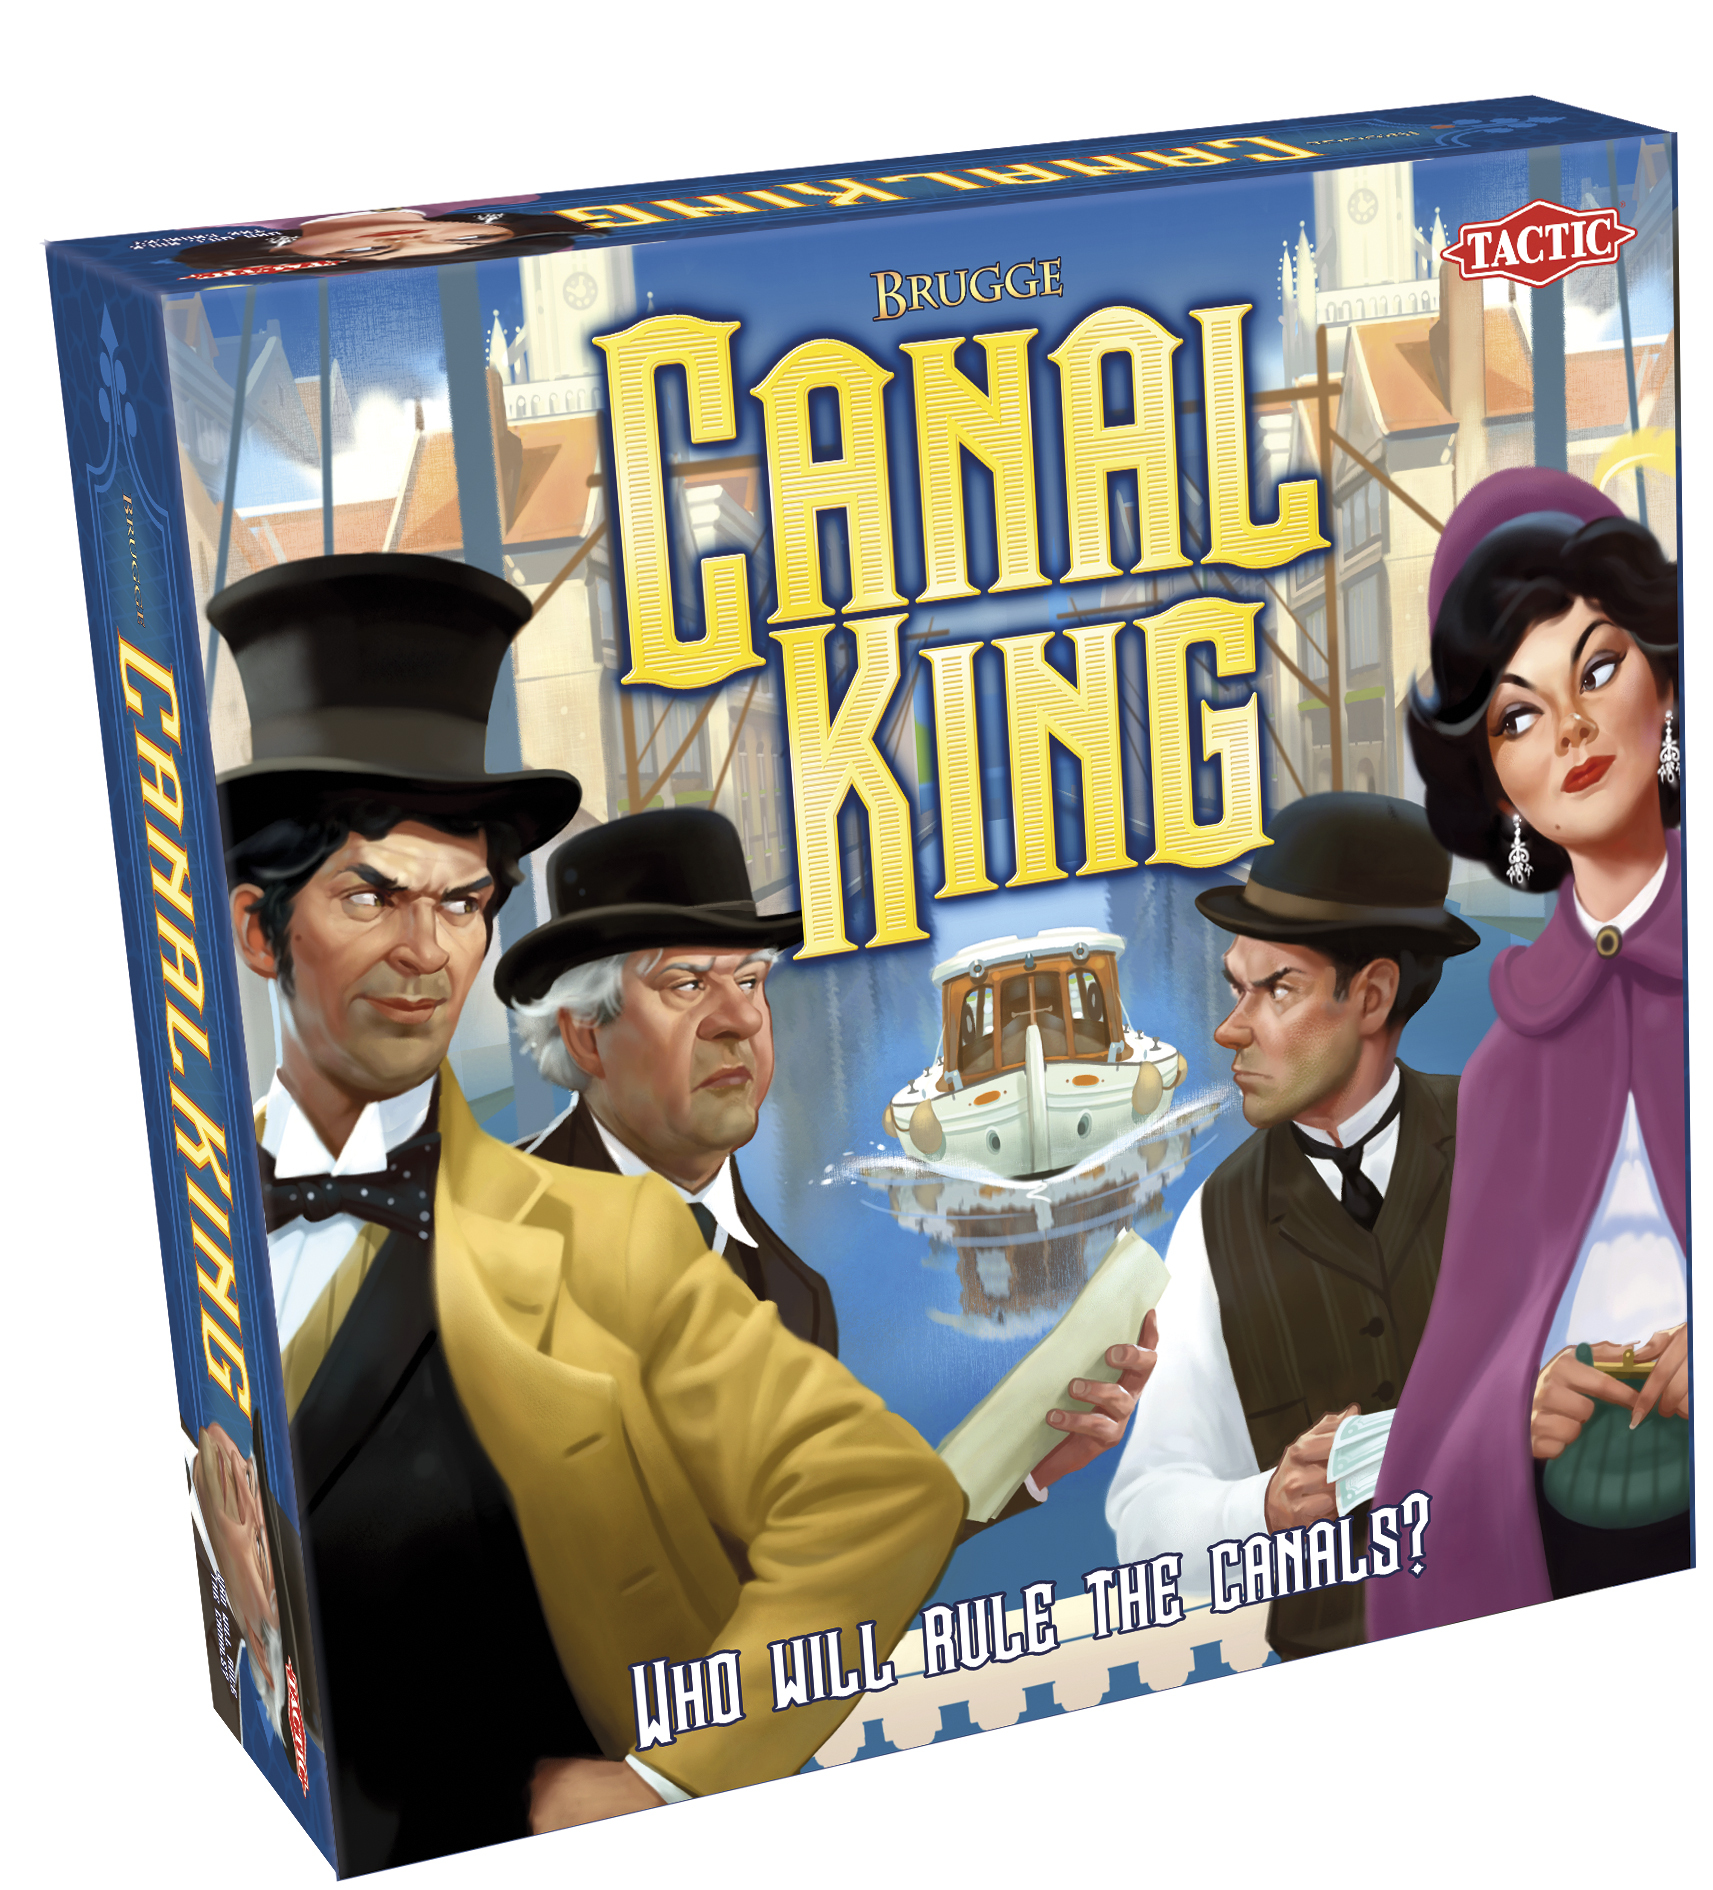 Tactic Canal King Brugge